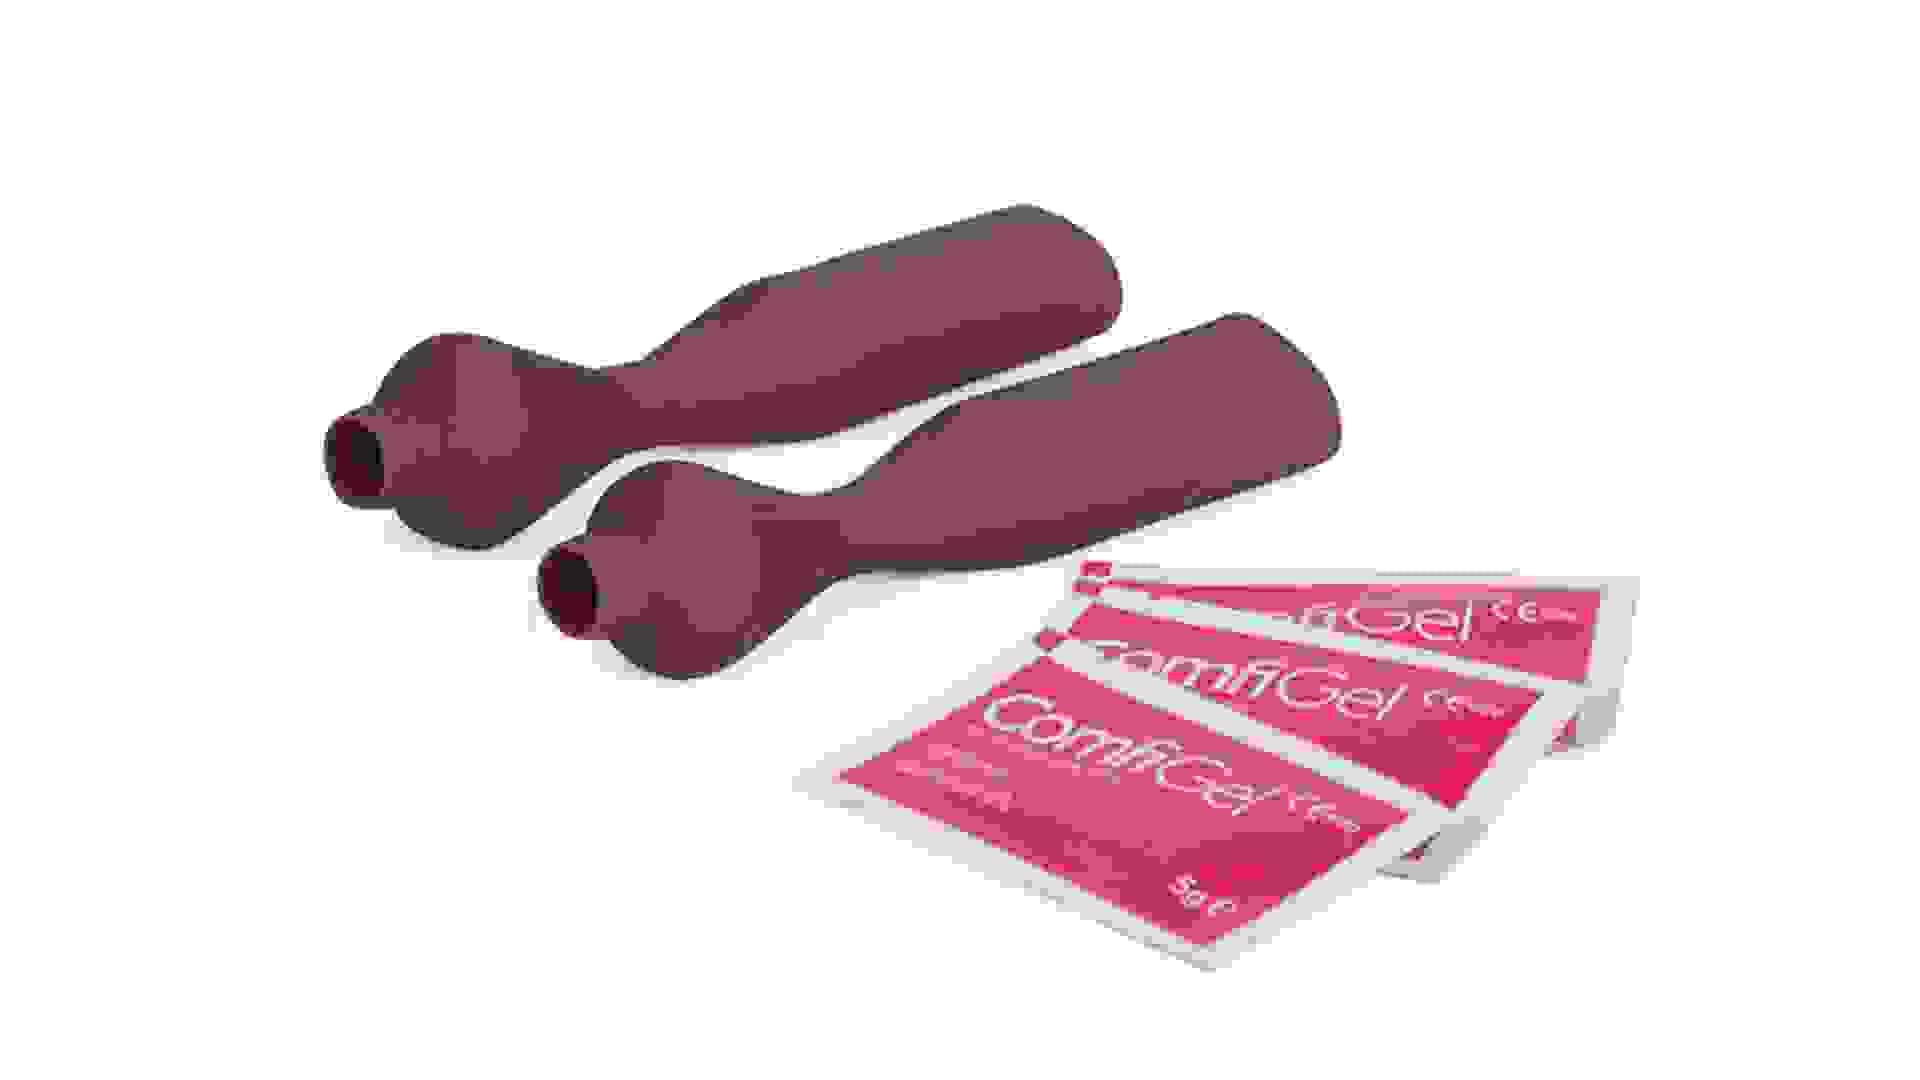 Replacement Dark Skin Tone Foreskins for the Clinical Male Pelvic Trainer.